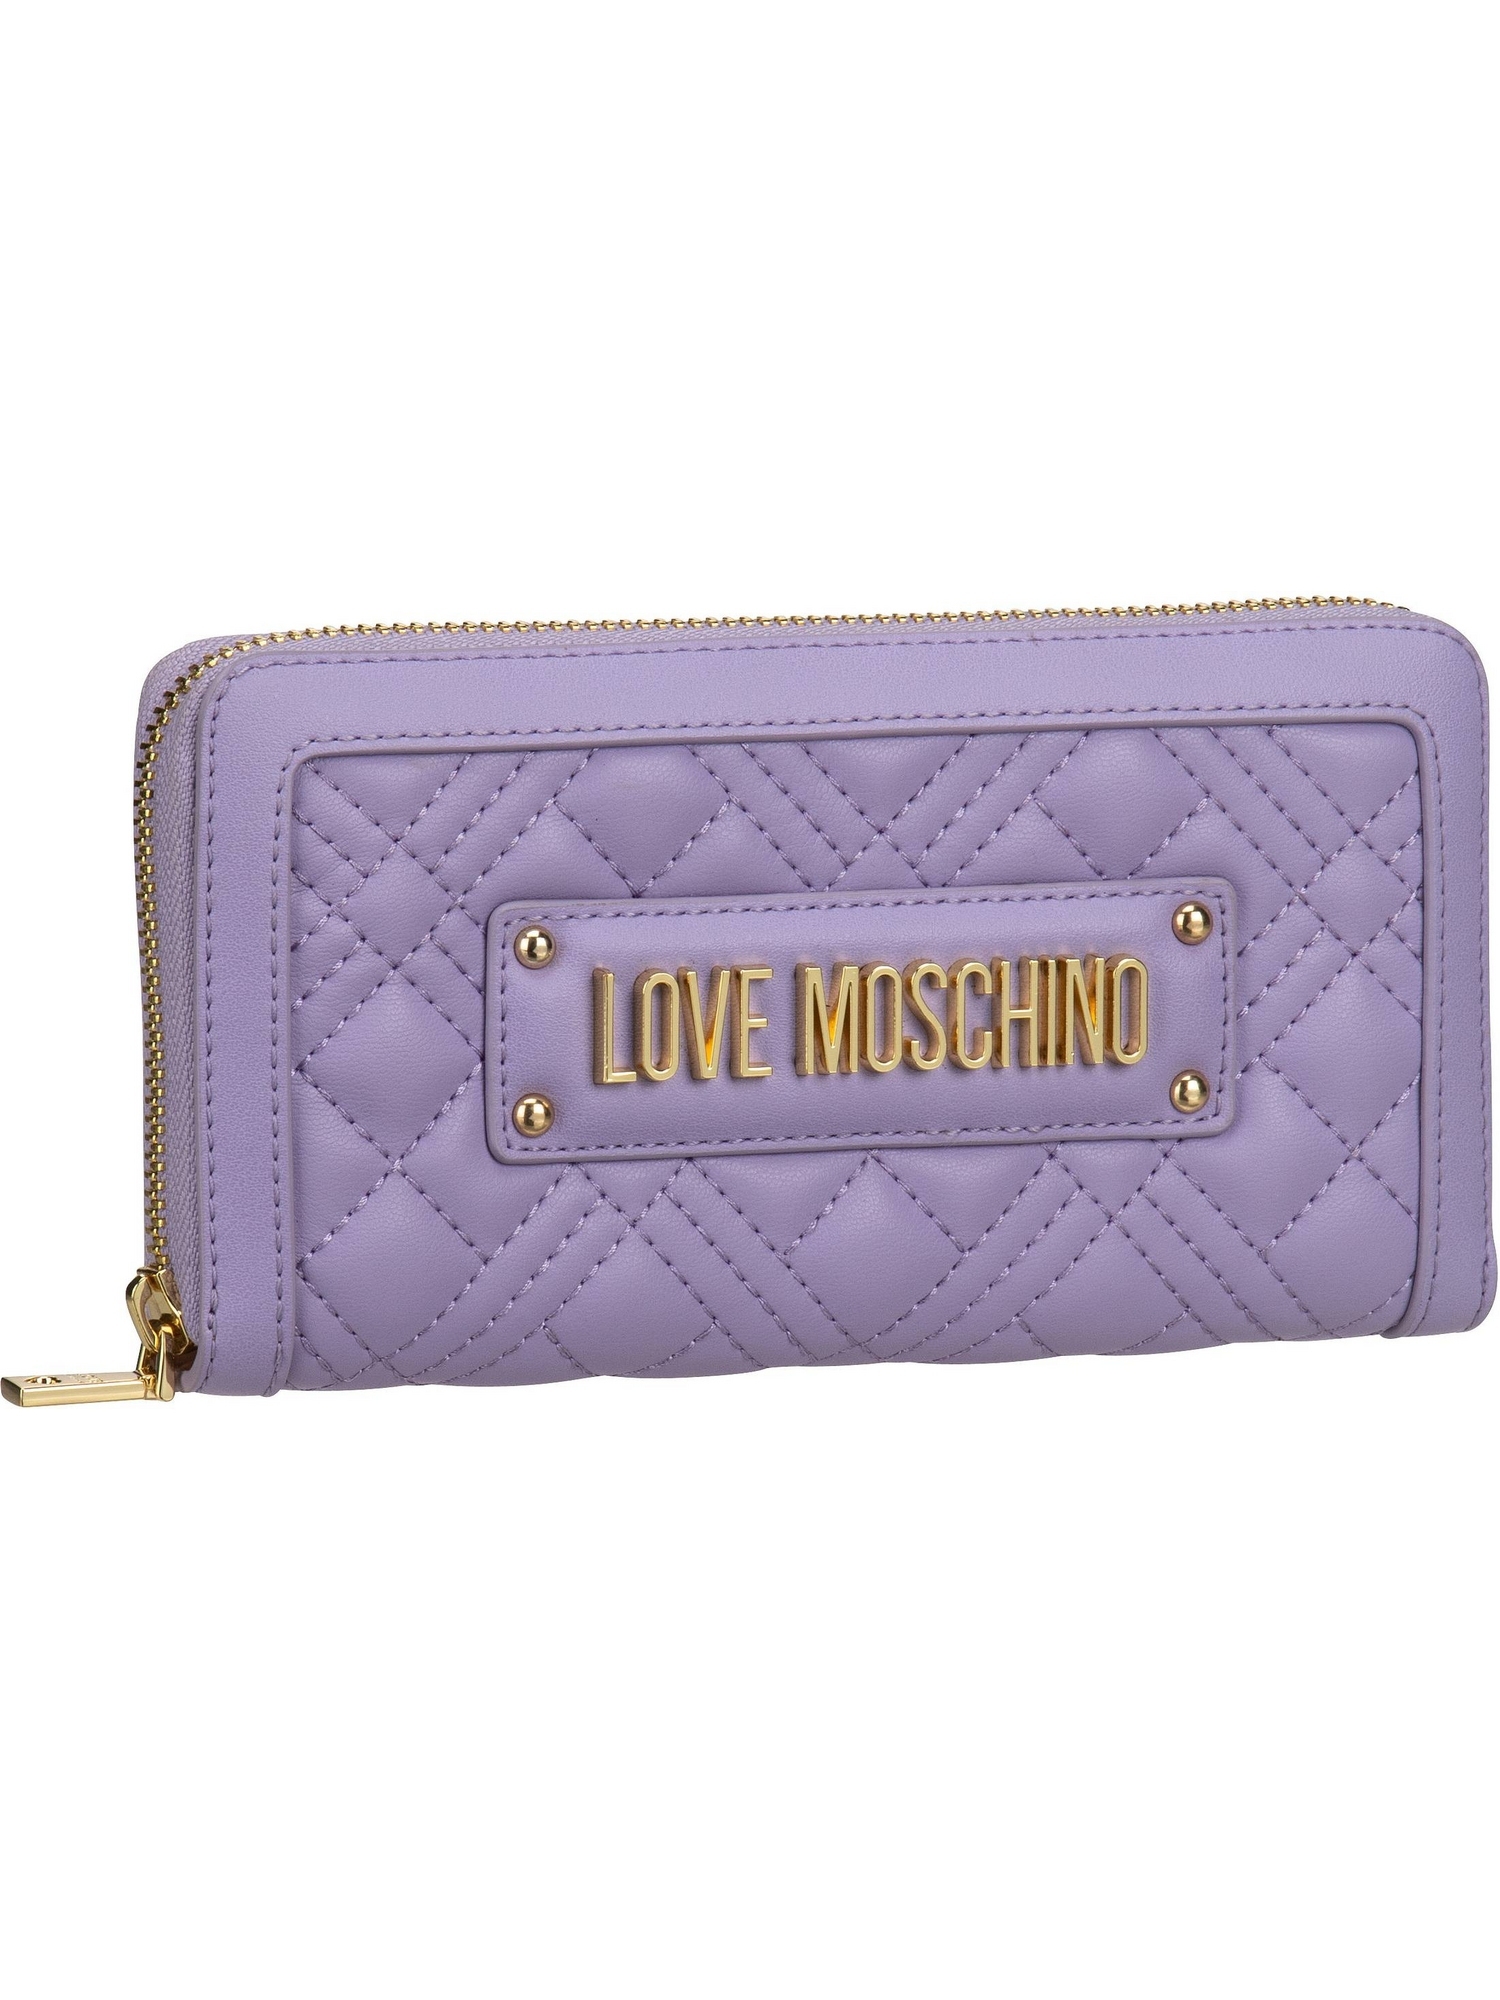 Кошелек Love Moschino Quilted Wallet 5600, цвет Lilac